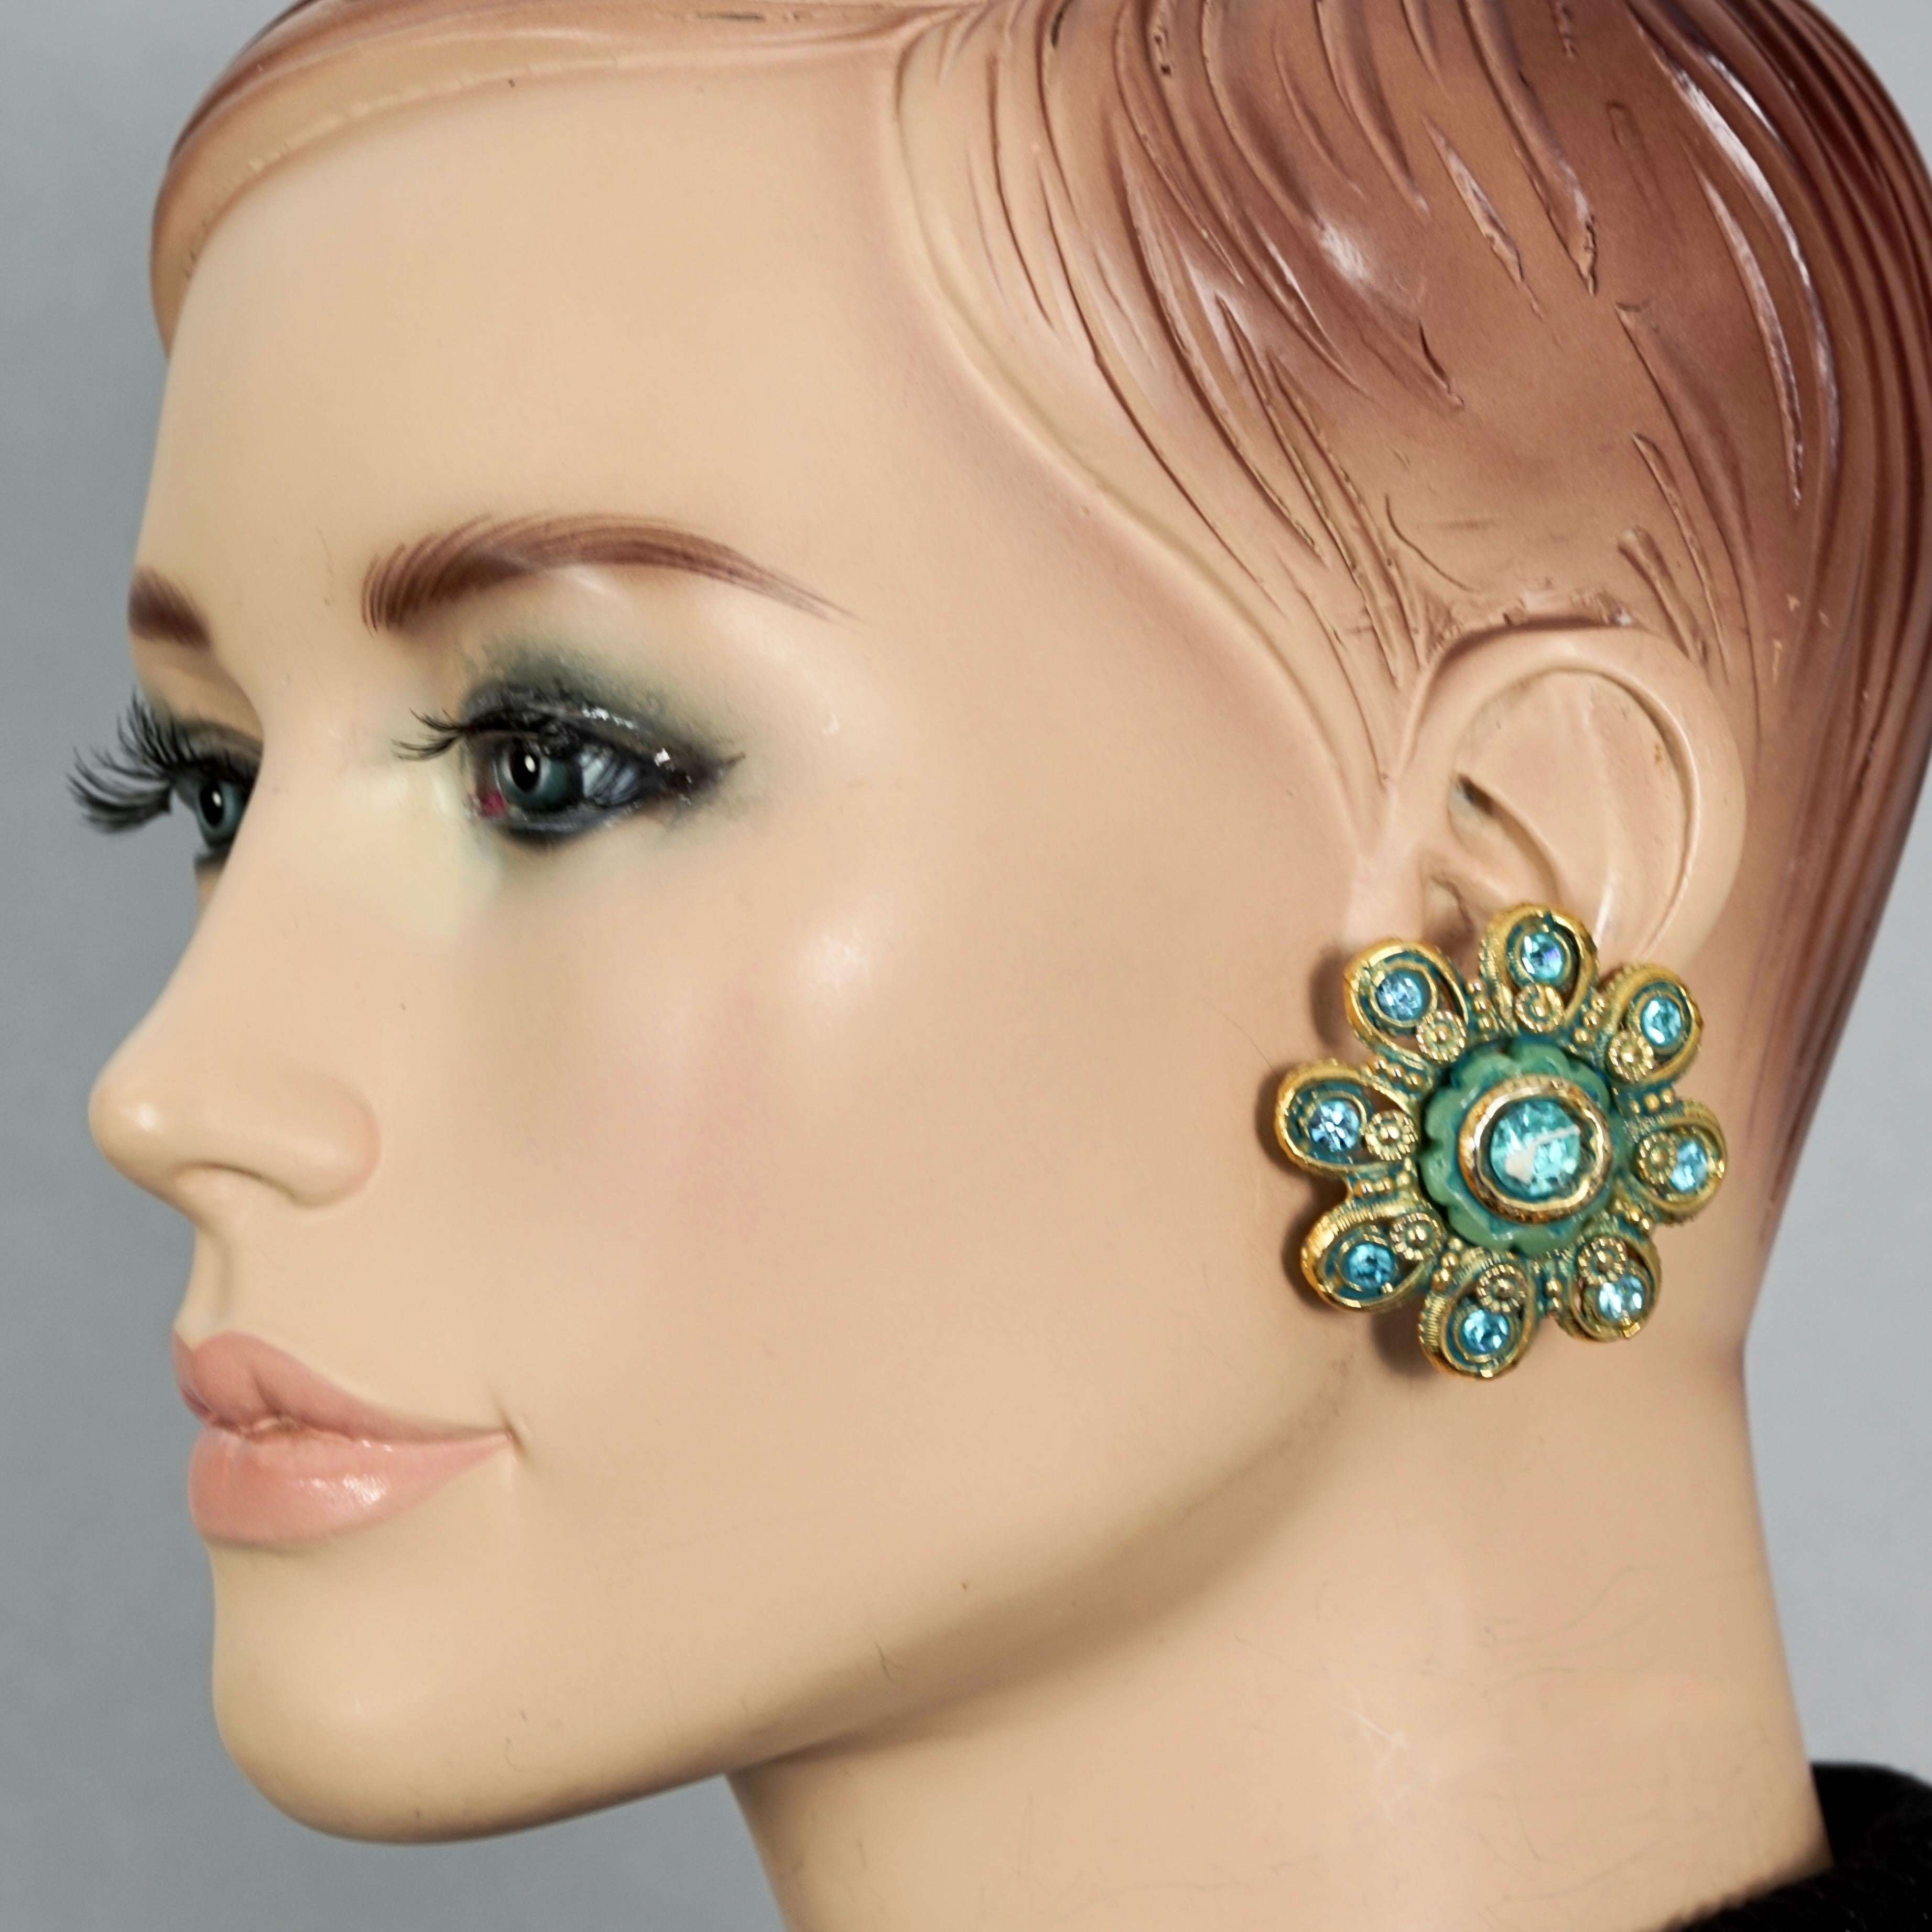 Vintage Massive KALINGER PARIS Blue Flower Resin with Rhinestones Earrings

Measurements:
Height: 1.73 inches (4.4 cm)
Width: 1.73 inches (4.4 cm)
Weight per Earring: 24 grams

Features:
- 100% Authentic KALINGER PARIS.
- Massive blue flower resin